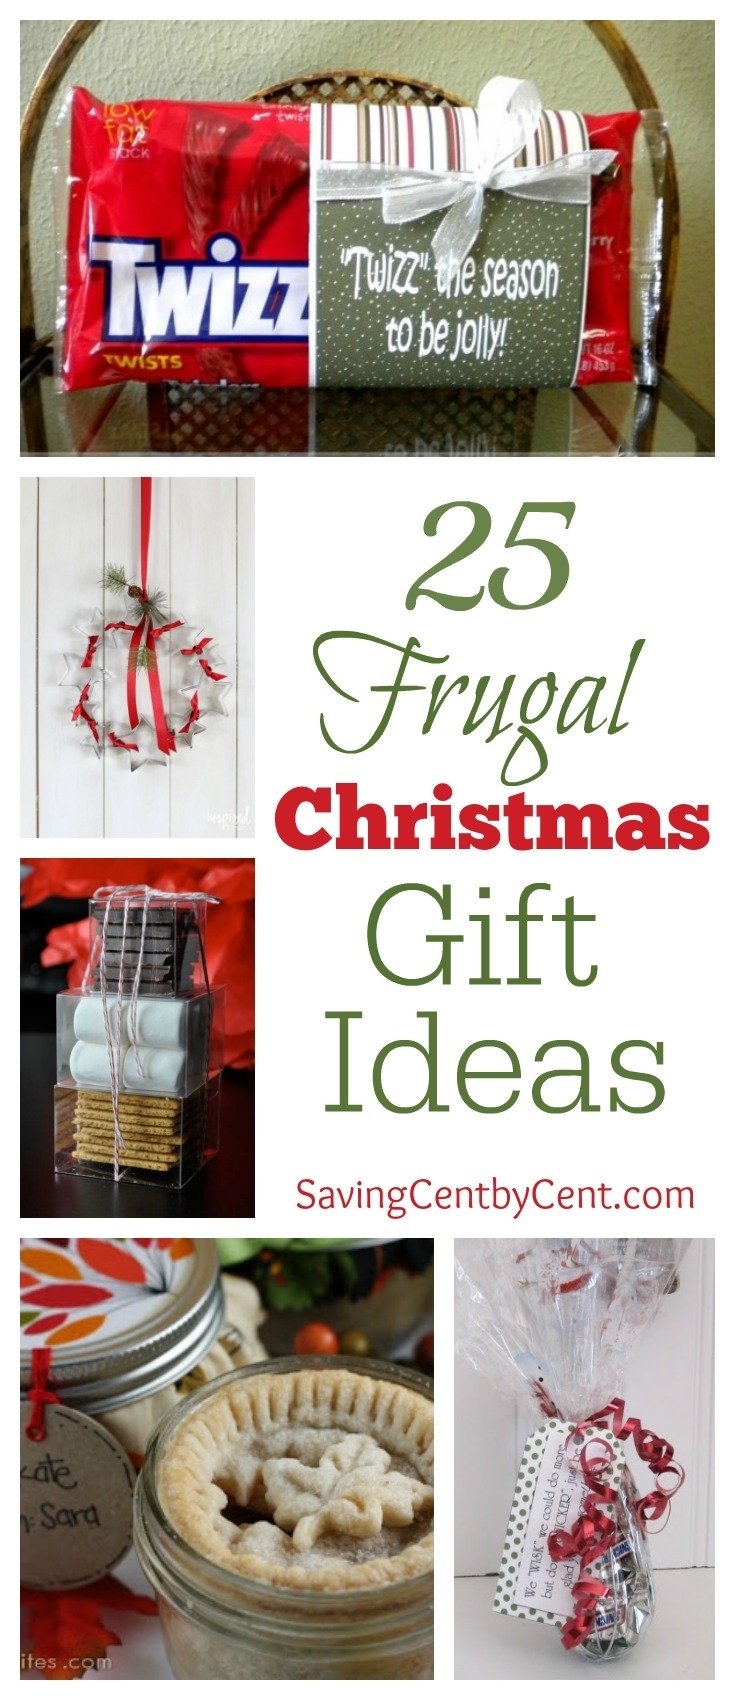 10 Spectacular Wife Christmas Gift Ideas 2012 25 frugal christmas gift ideas part 1 saving centcent 2022